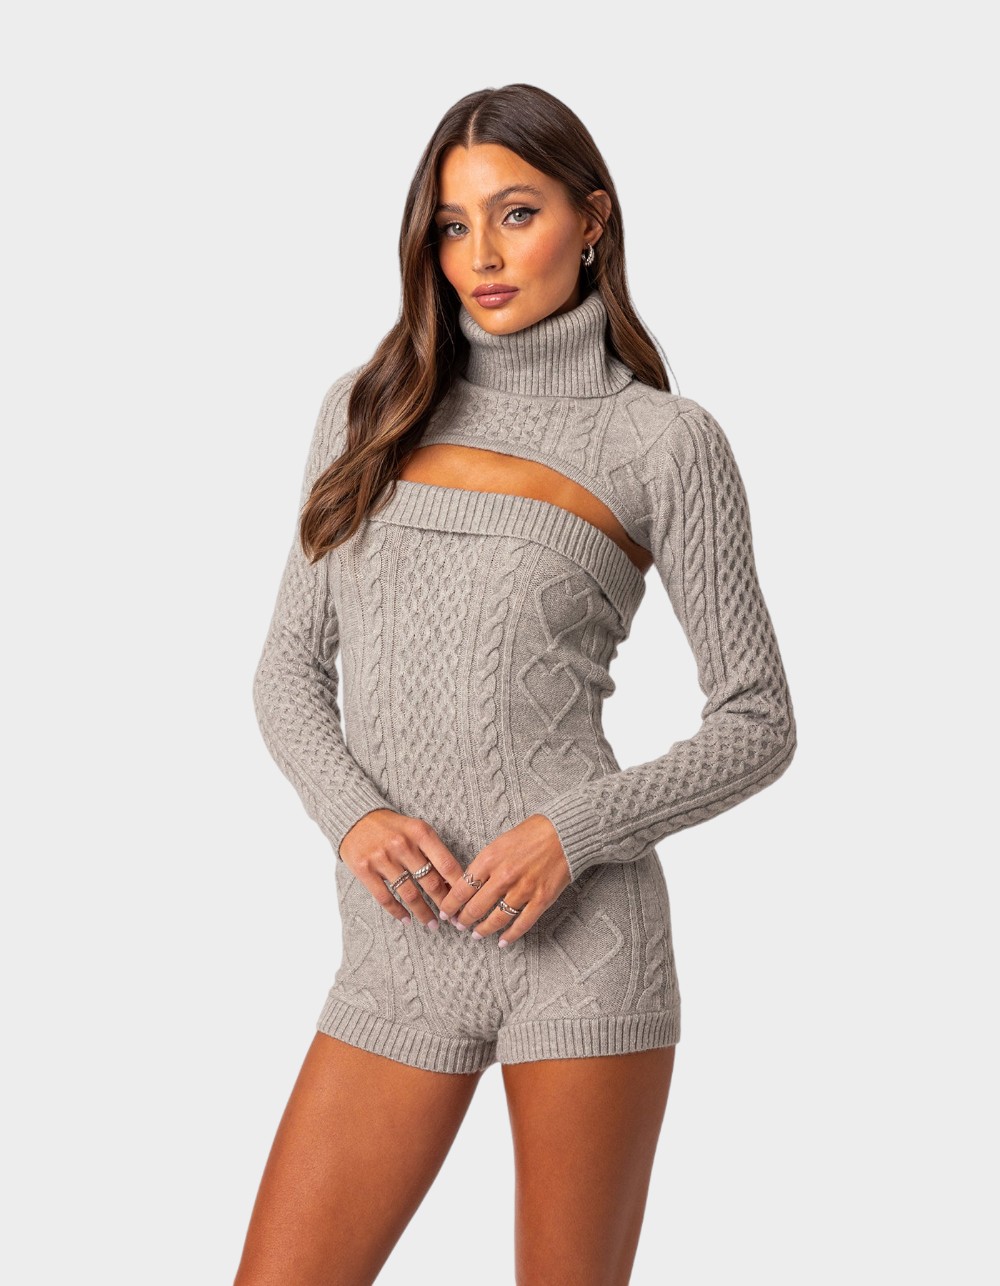 EDIKTED Finnley Two Piece Cable Knit Romper